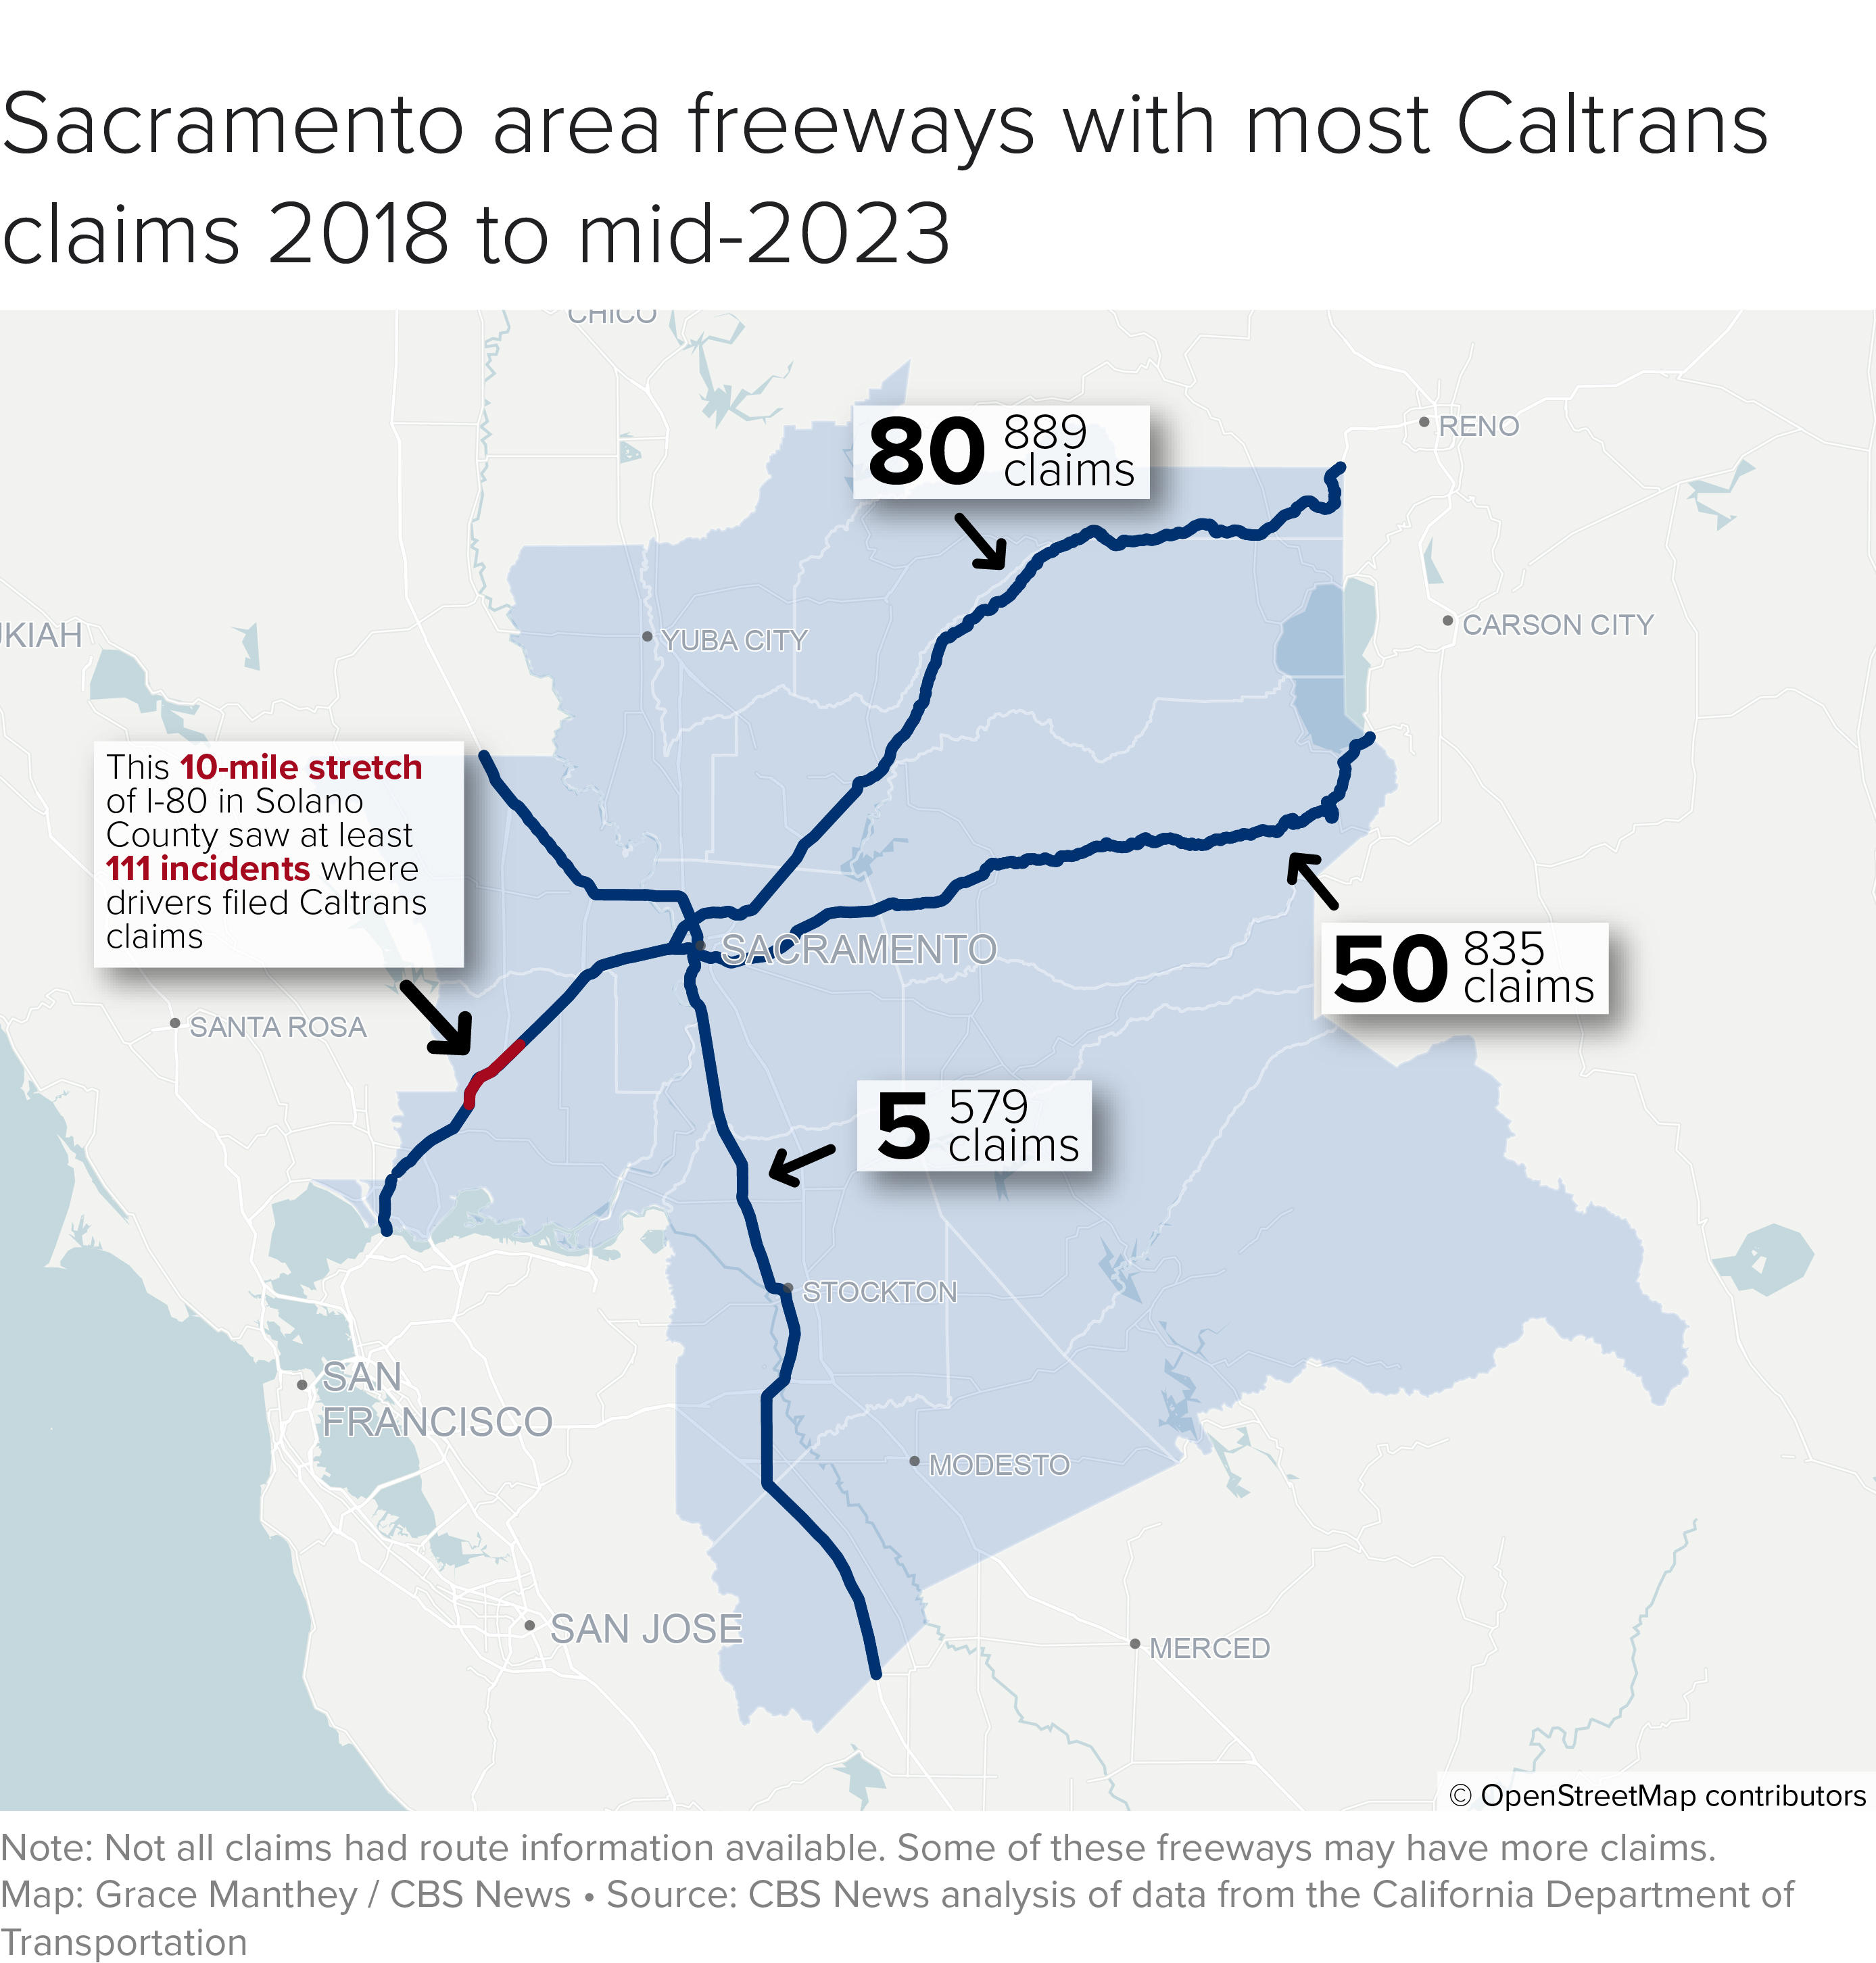 In the Sacramento region, the 80 tops the list of complaints with nearly 900 claims between 2018 and mid-2023, followed by highway 50 and highway 5. 